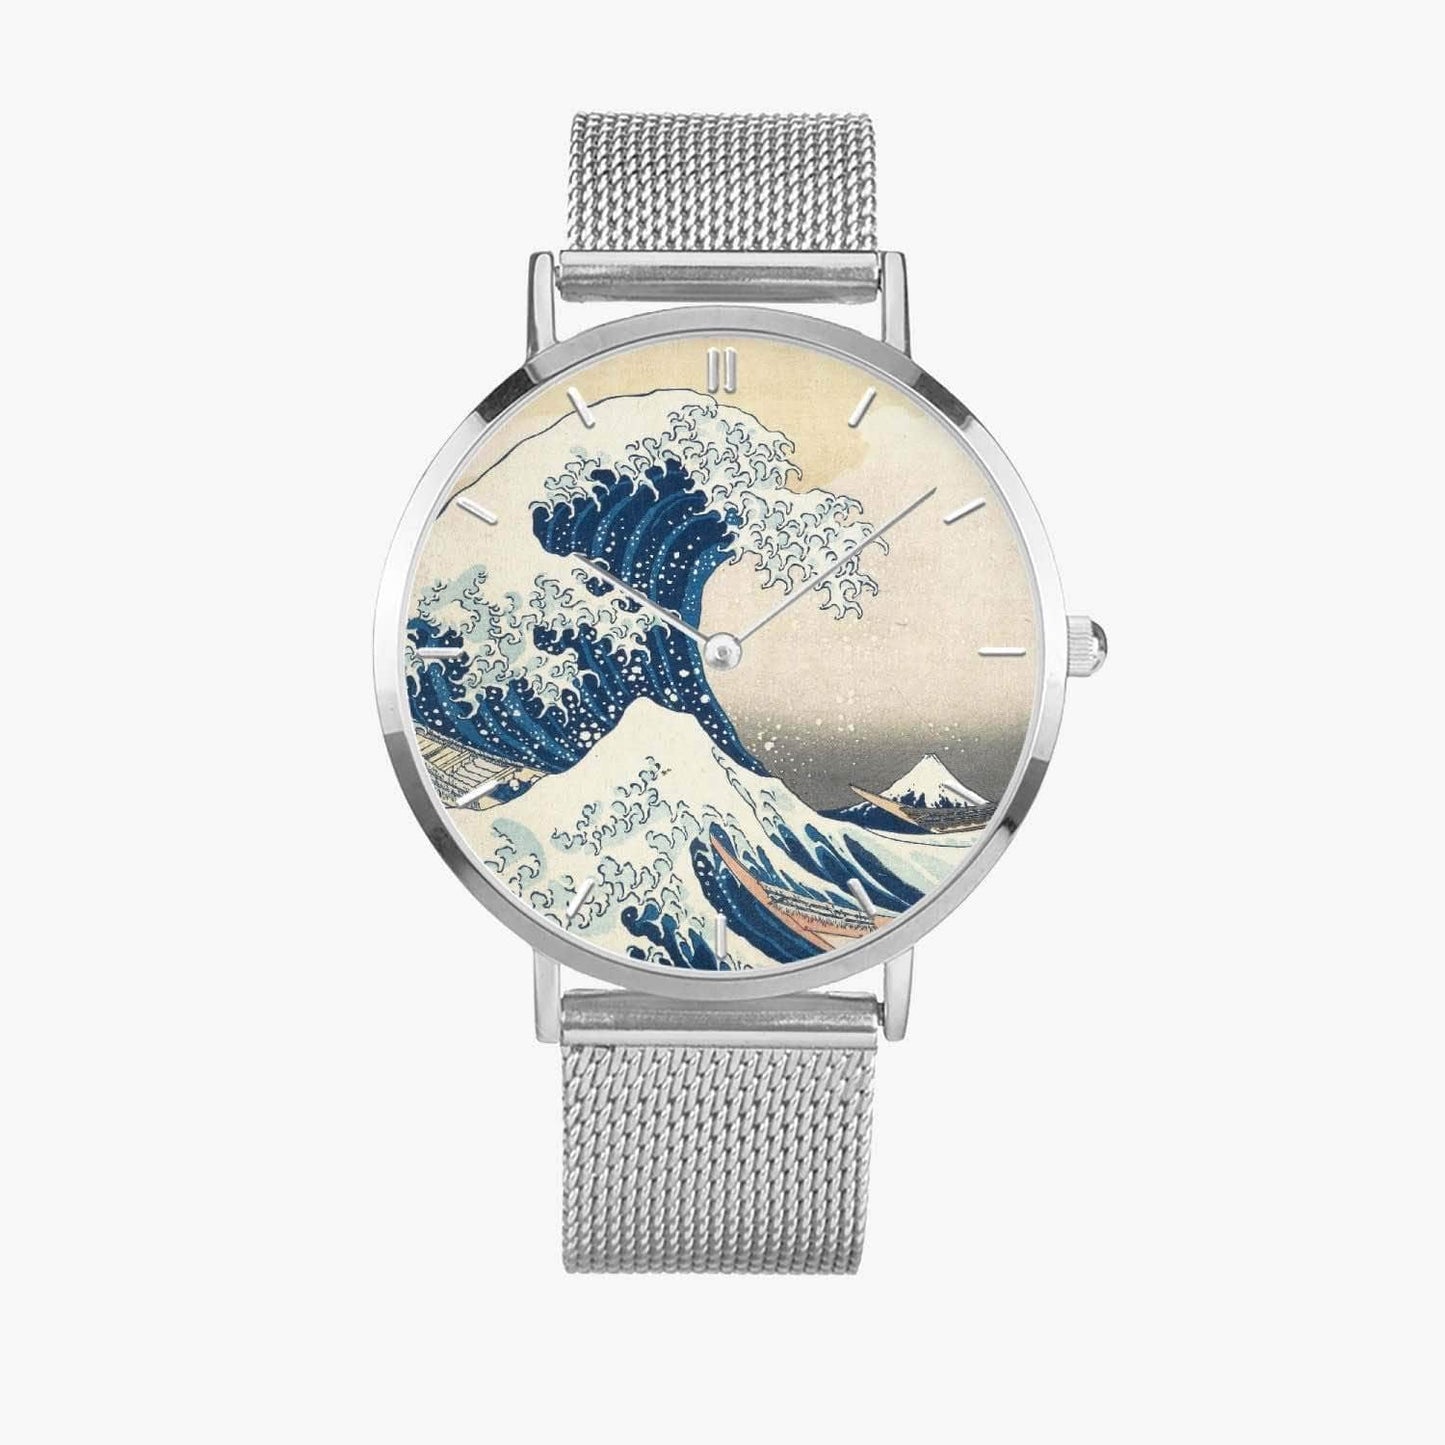 Silver The Great Wave watch from Gallery Serpentine